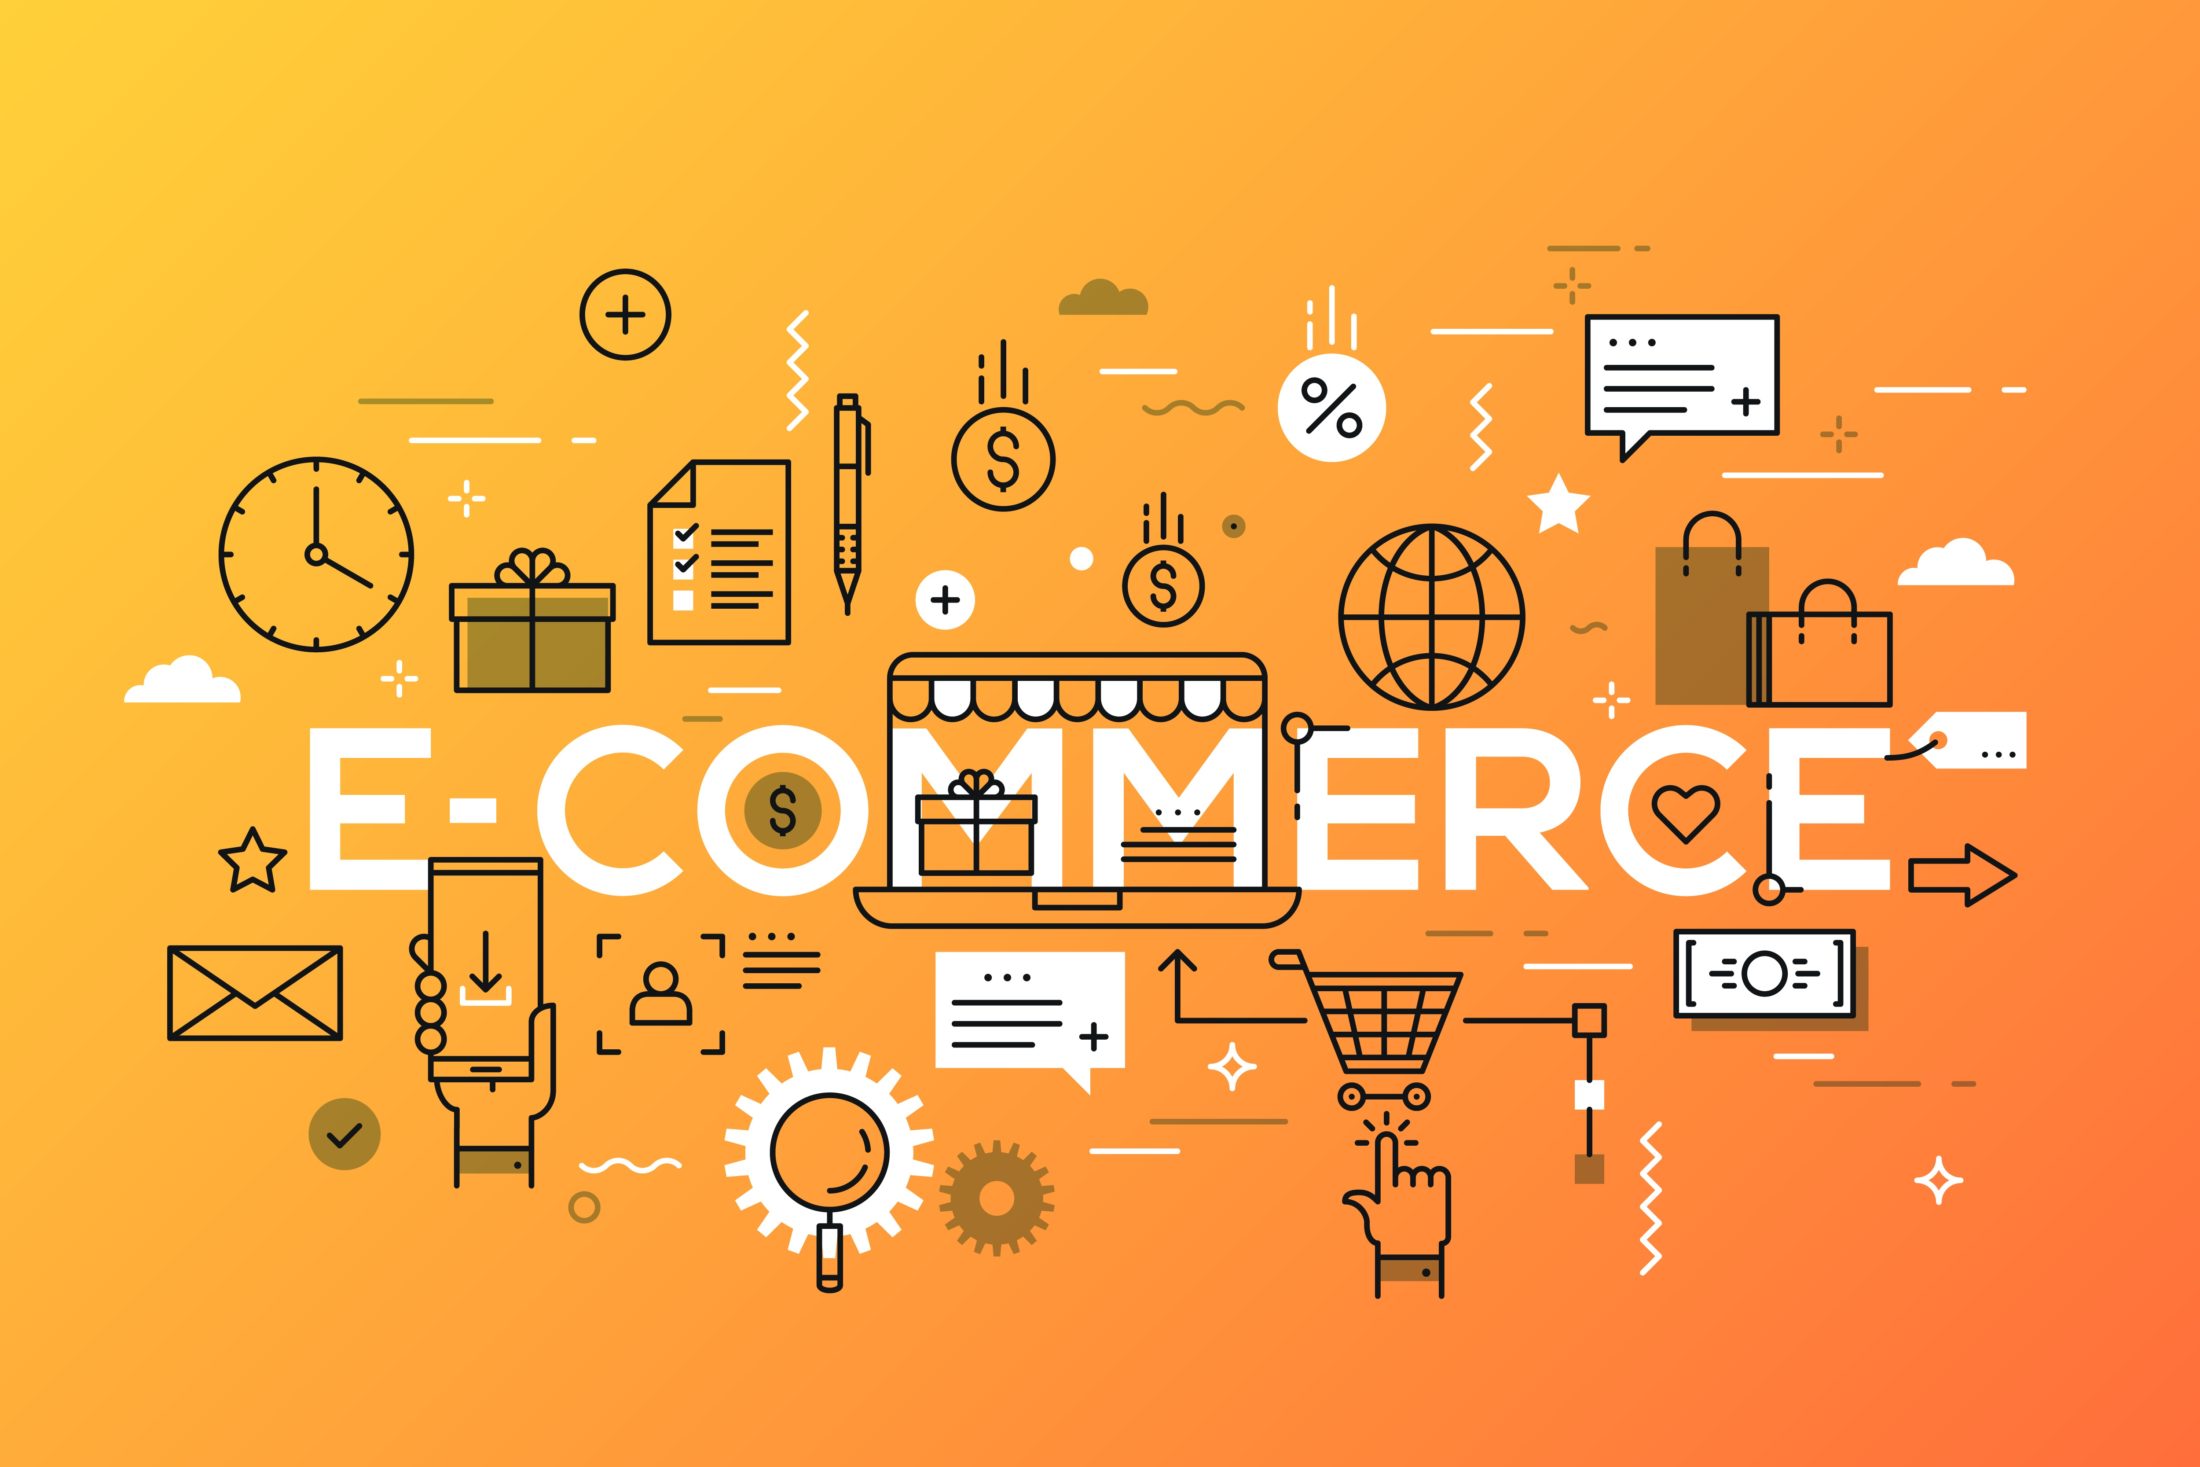 Top Ecommerce Trends to Follow in 2022